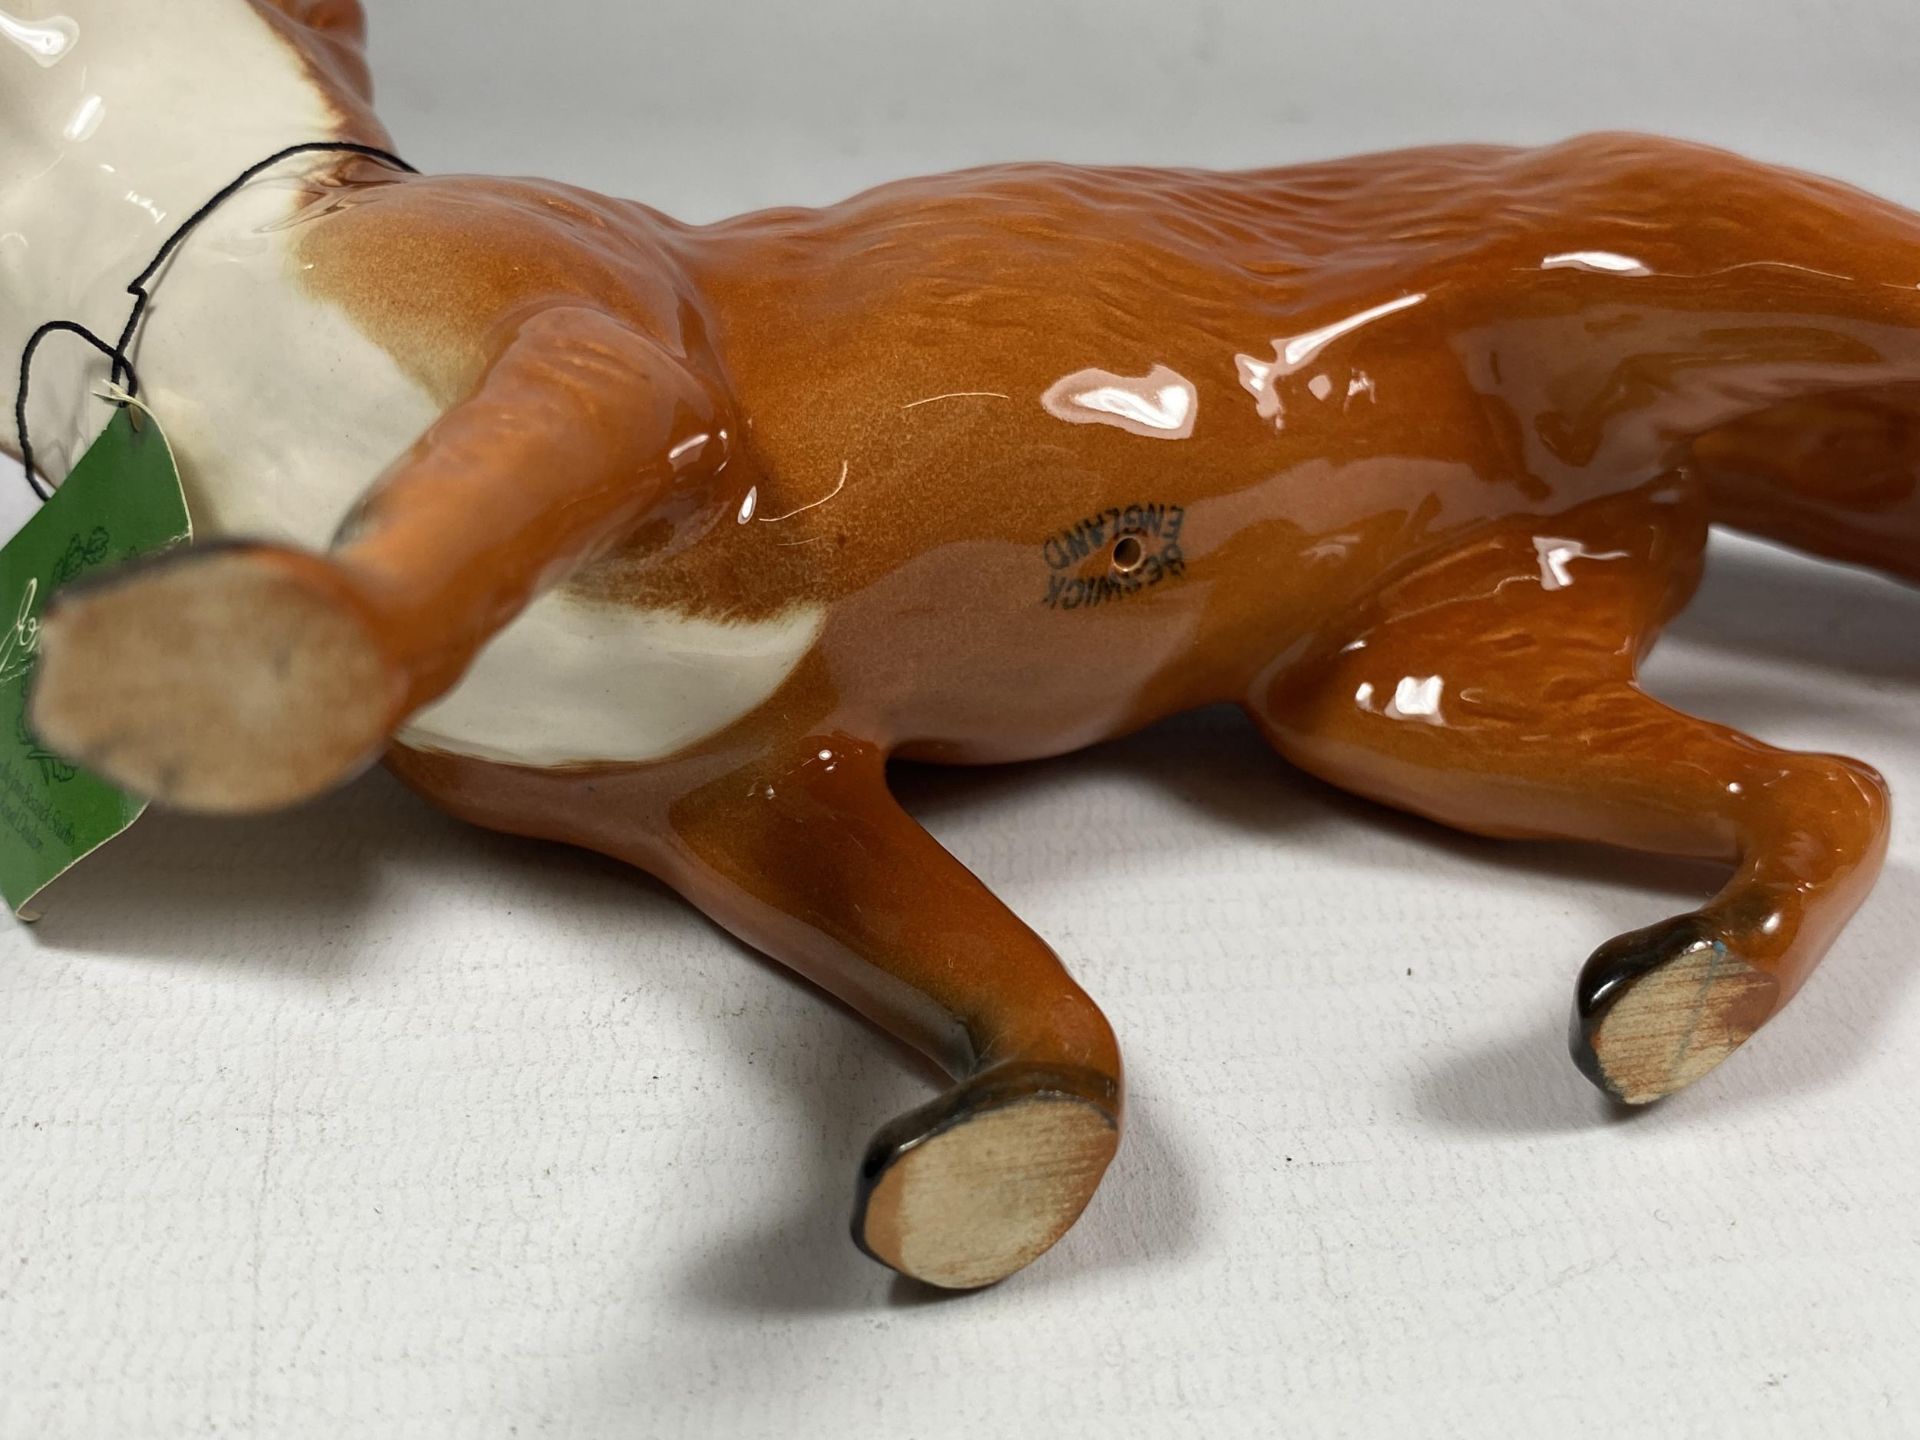 A BESWICK POTTERY MODEL OF A FOX - Image 4 of 4